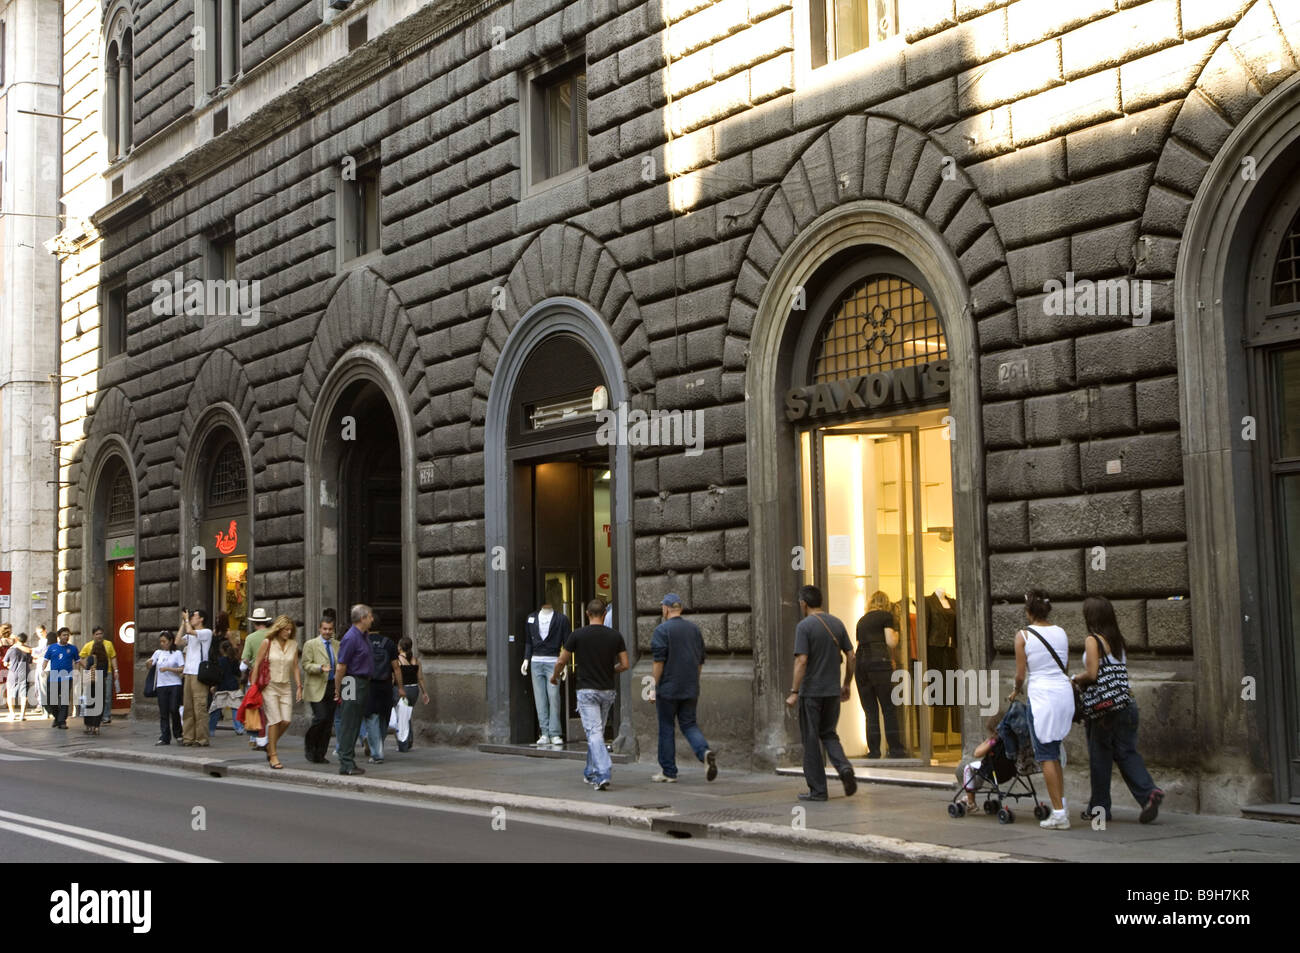 Italy Rome via Del Corso shopping streets businesses passers-by  Architecture shopping shopping street Europe facade pedestrians Stock Photo  - Alamy